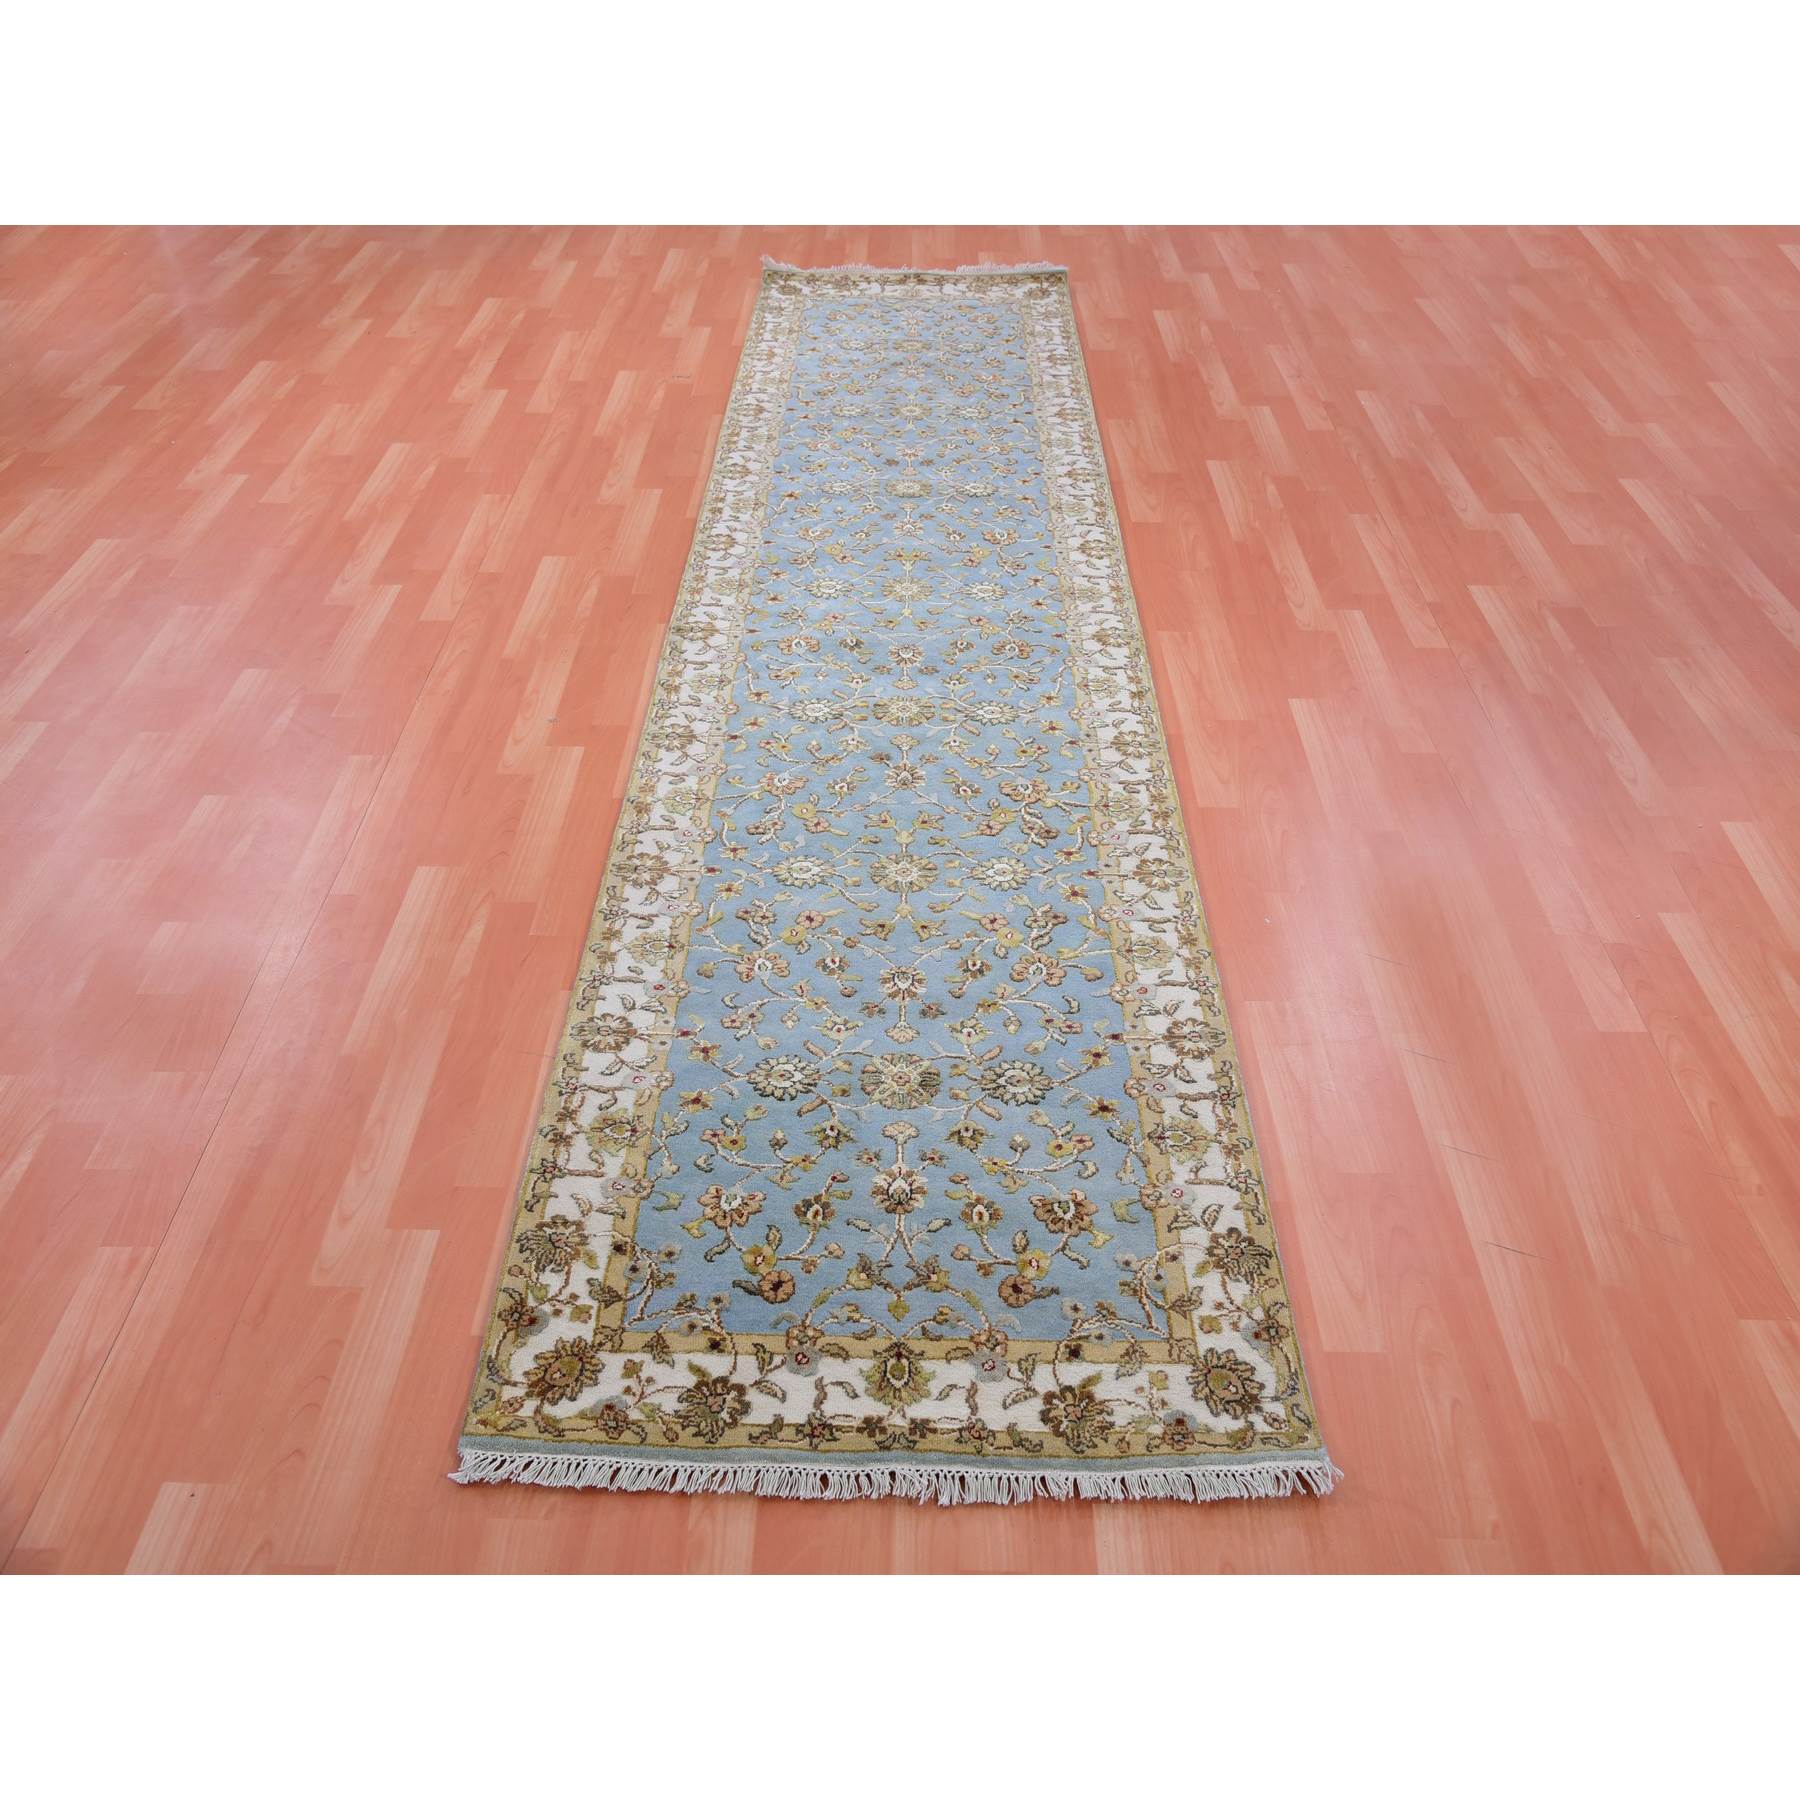 Rajasthan-Hand-Knotted-Rug-376900